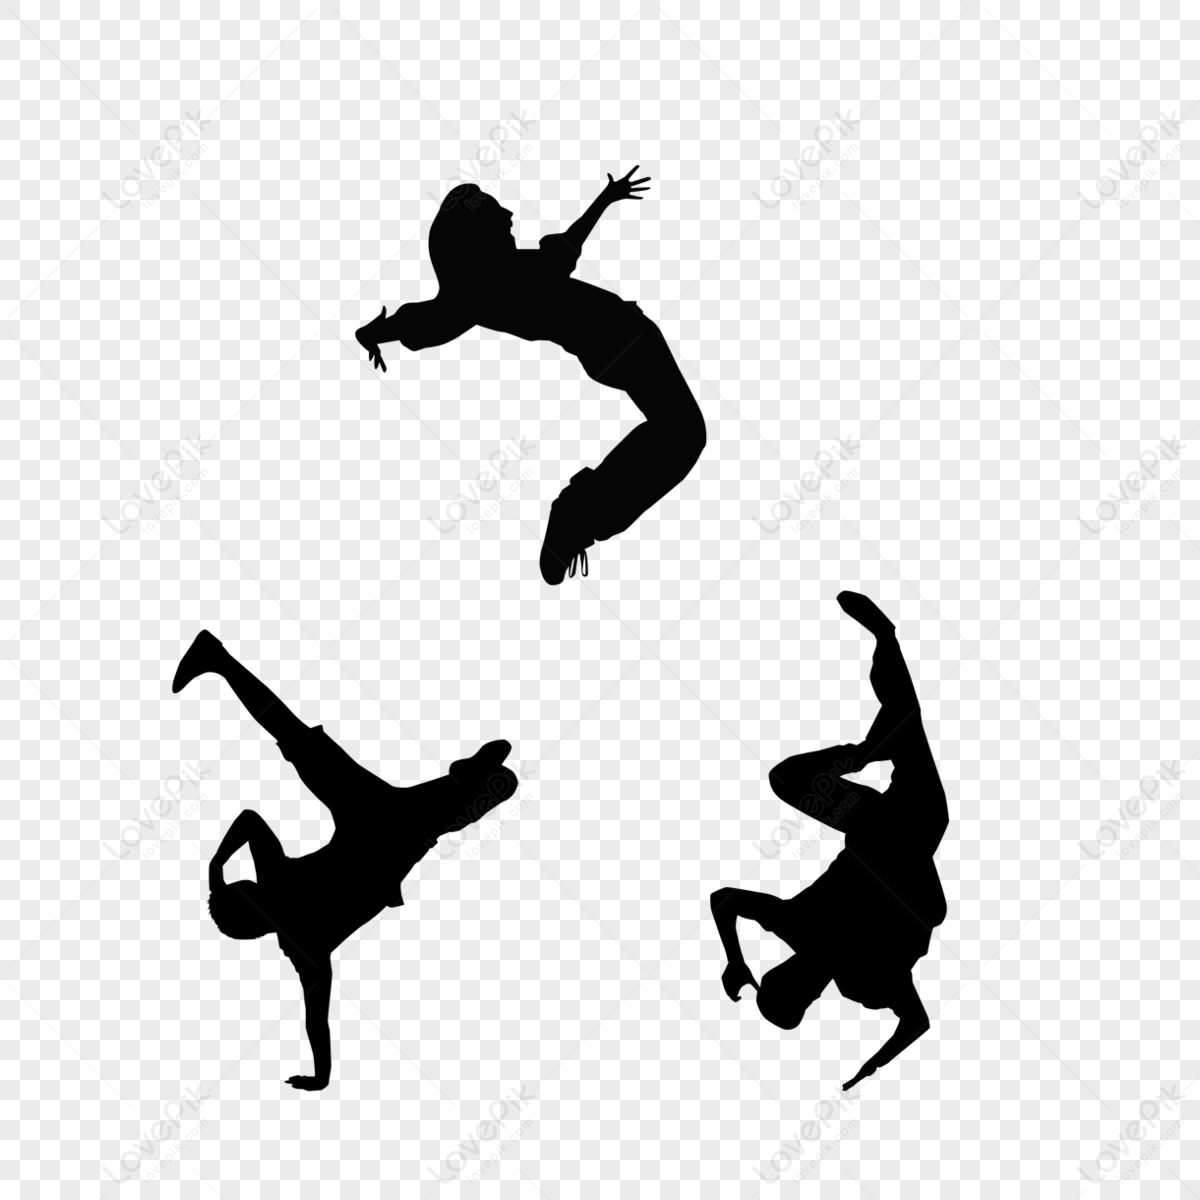 Black And White Silhouettes Of Dancing Figures Characters Character Free Png And Clipart Image